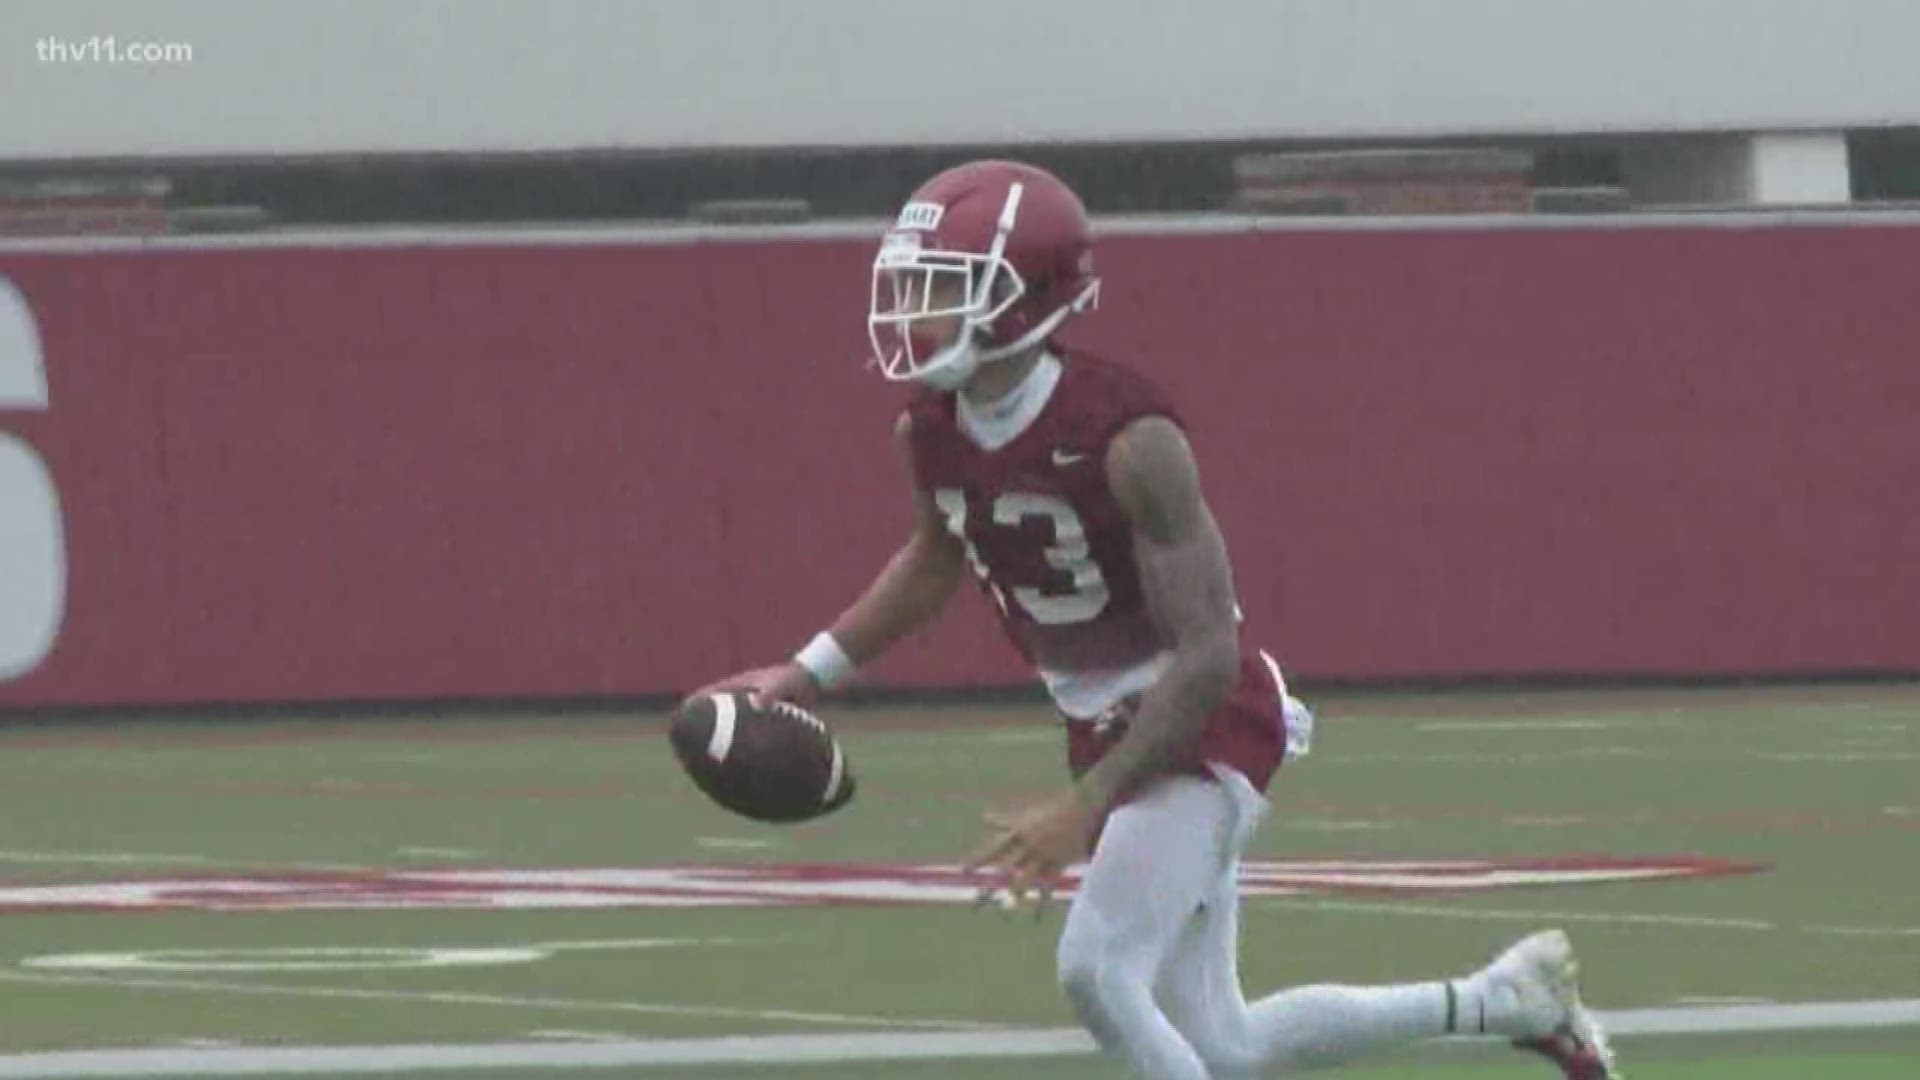 The senior wide receiver reportedly tore his ACL during Saturday's scrimmage